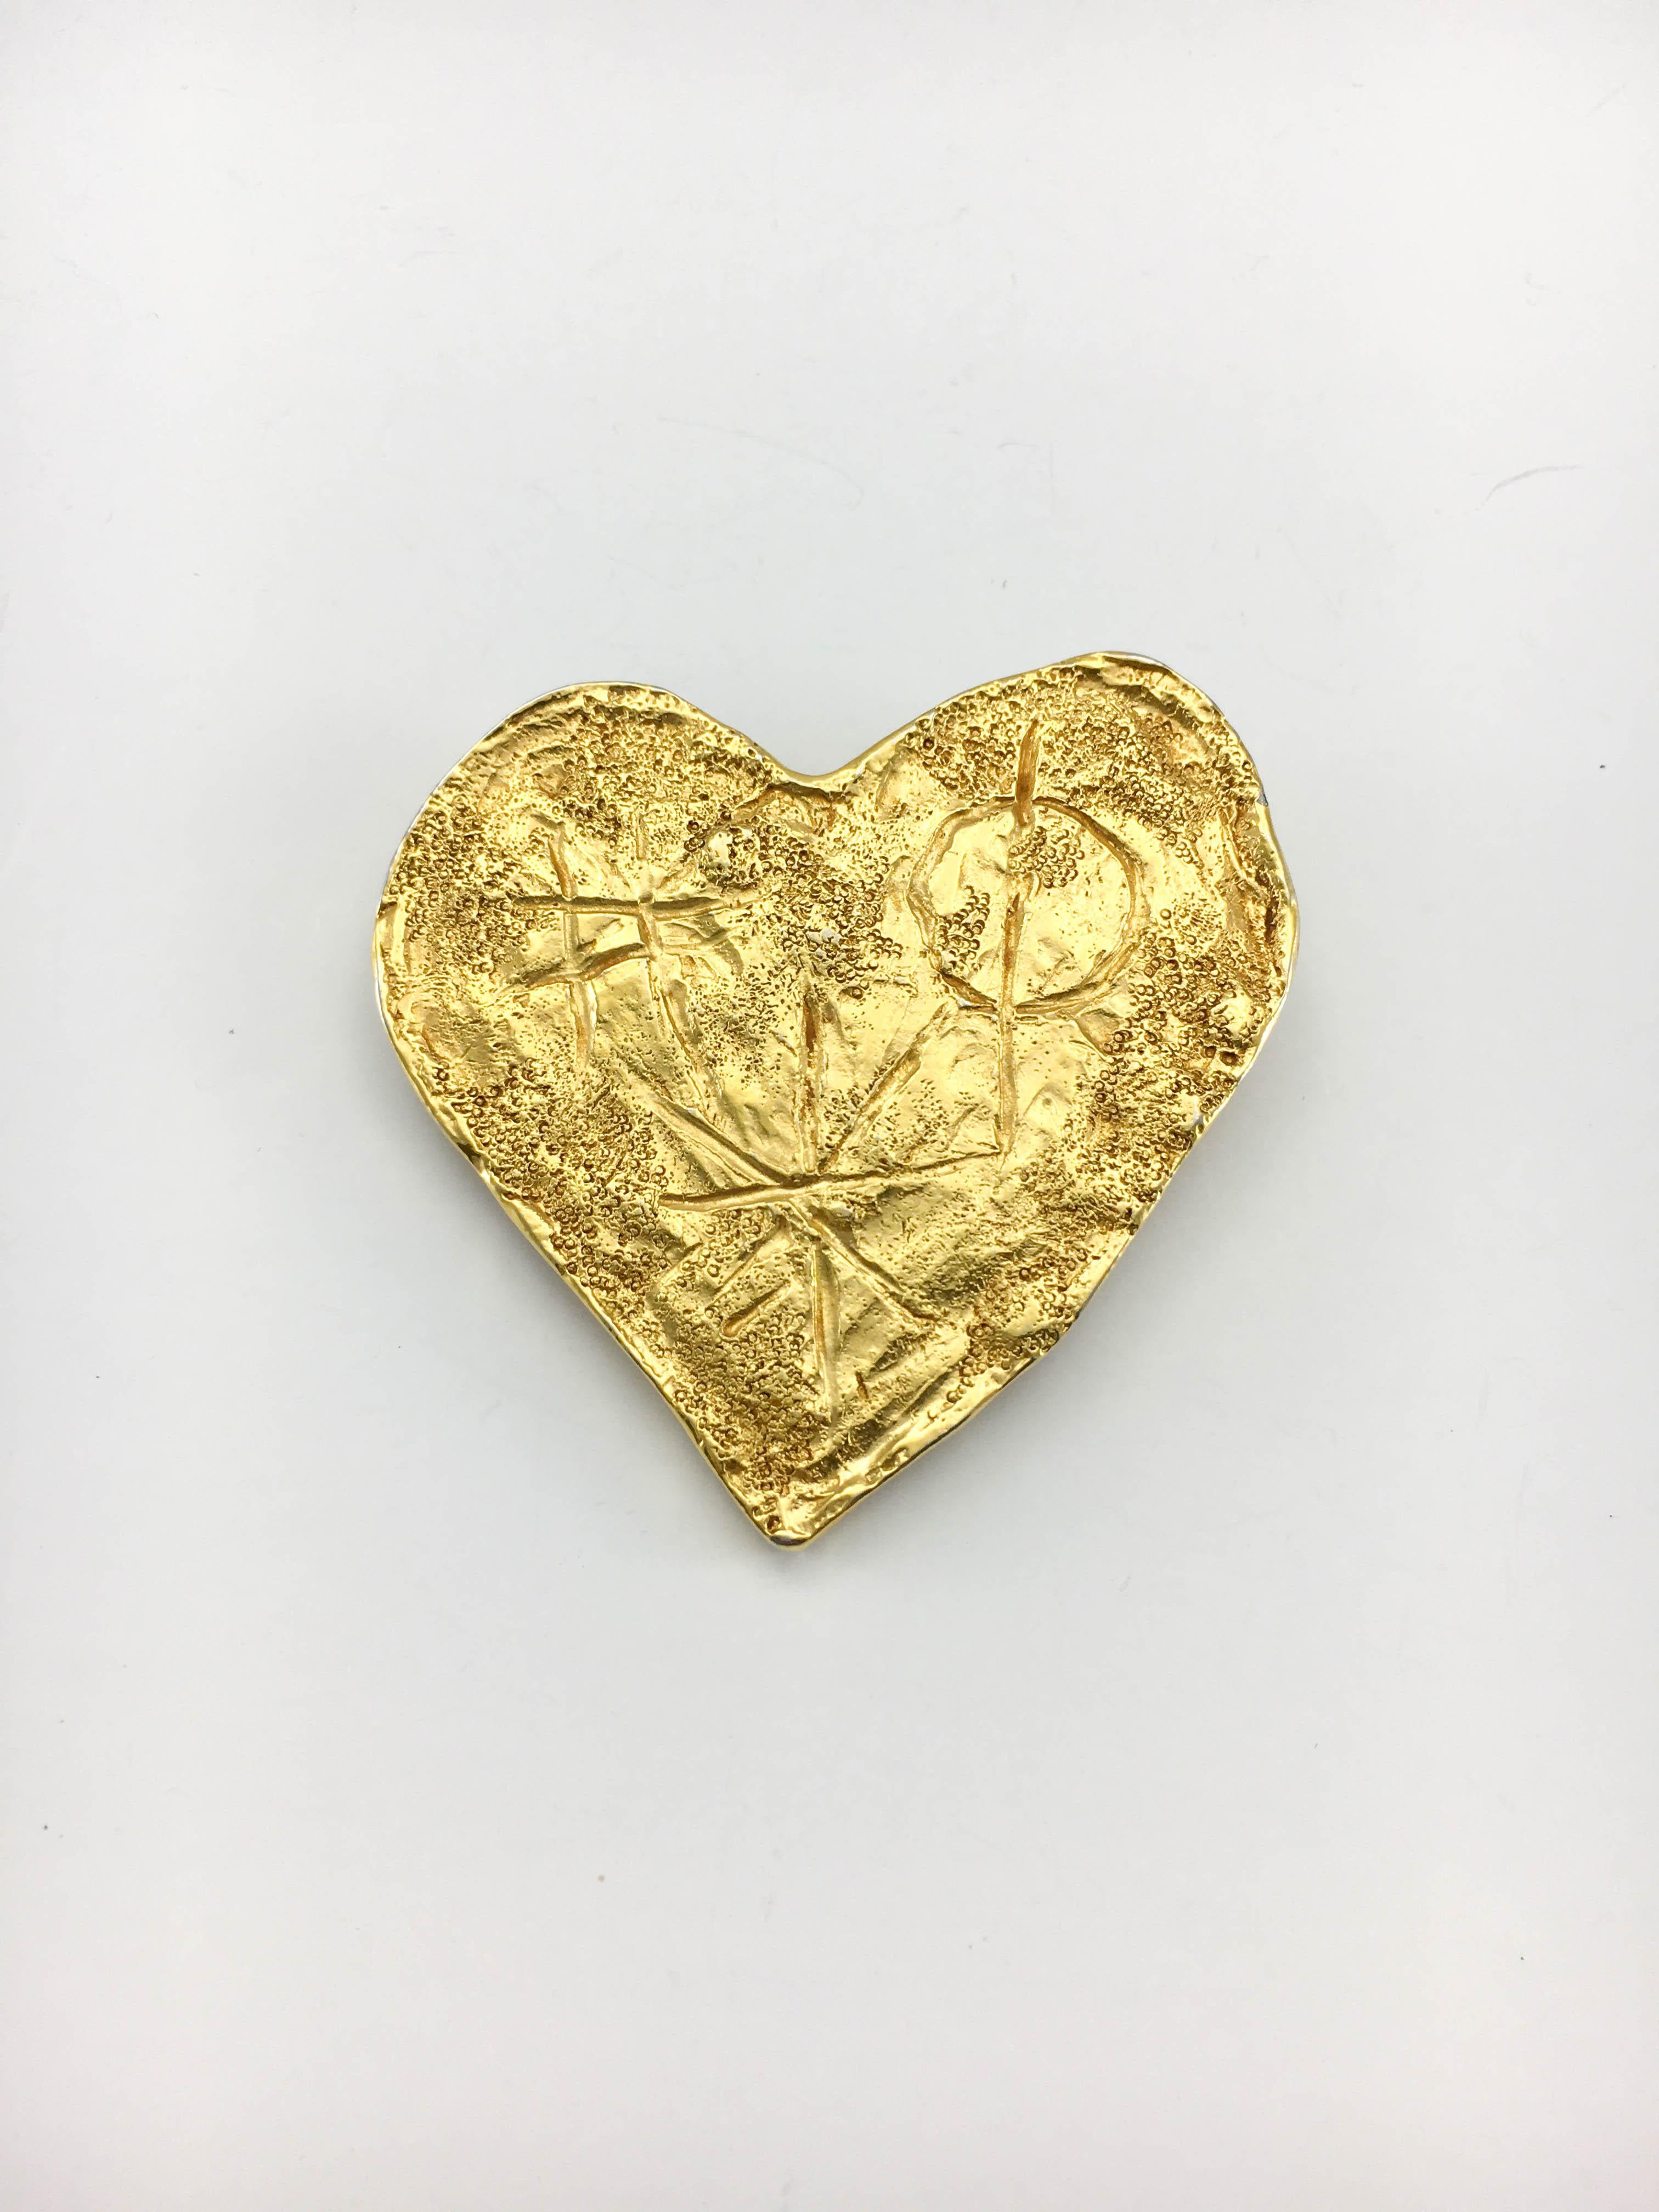 Vintage Christian Lacroix Gold-Plated Texturized Brooch. This striking brooch by Christian Lacroix by Goossens was created in 1994. Heart-shaped and crafted in gold-plated metal, this piece is texturized, giving it an organic, raw feel, and bears a